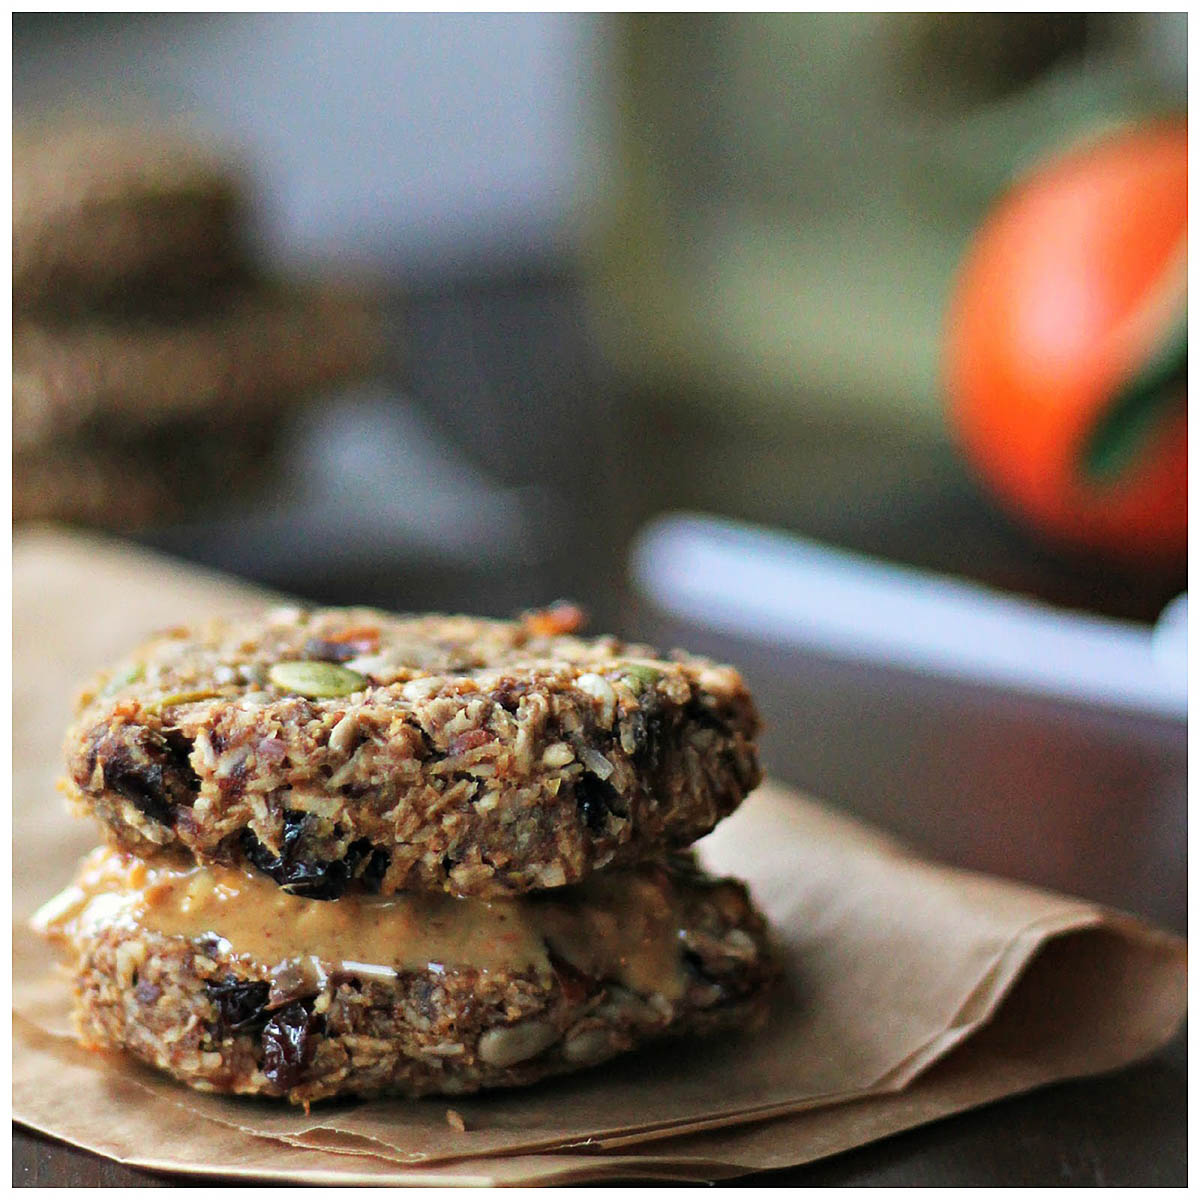 Two seedy cookies sandwiched with nut butter.